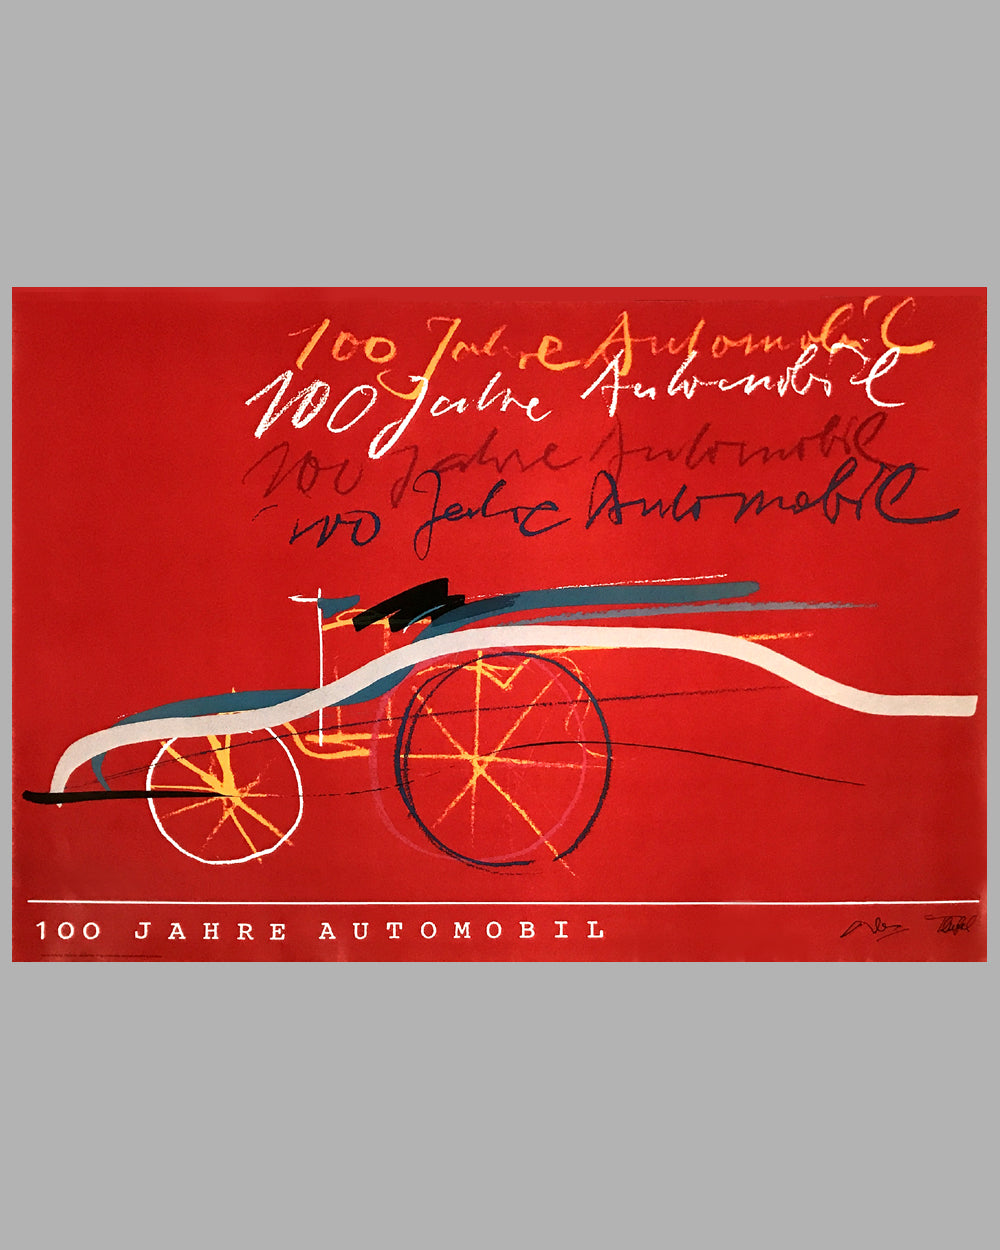 100 Jahre Automobil commemorative poster by Alfred Benz and Rolf Teufel